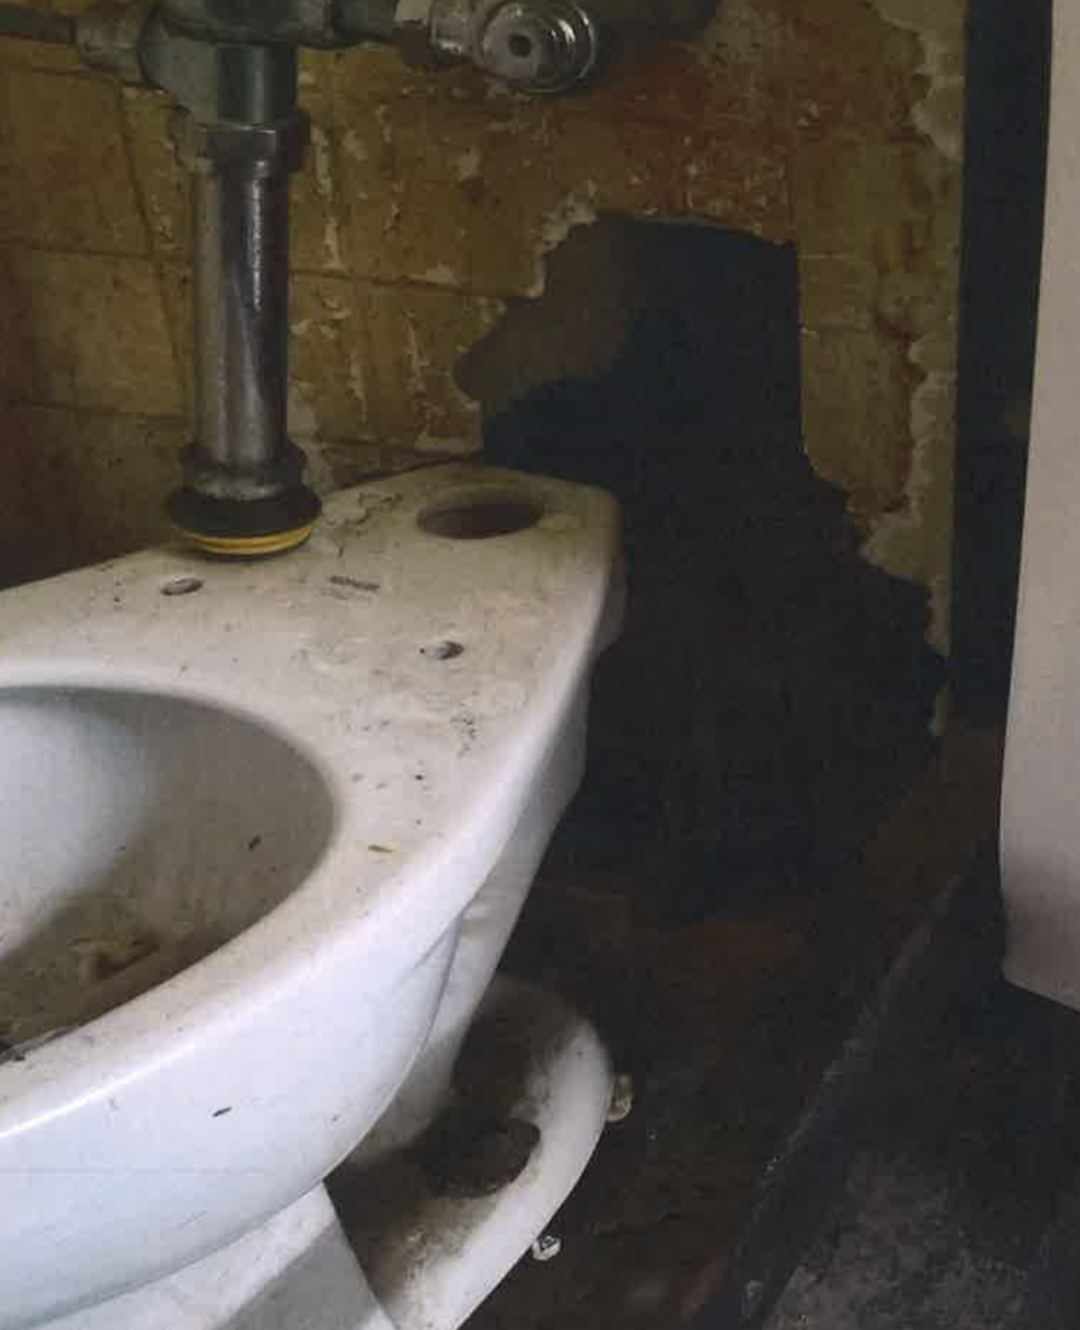 Hole in wall behind toilet that's inoperable